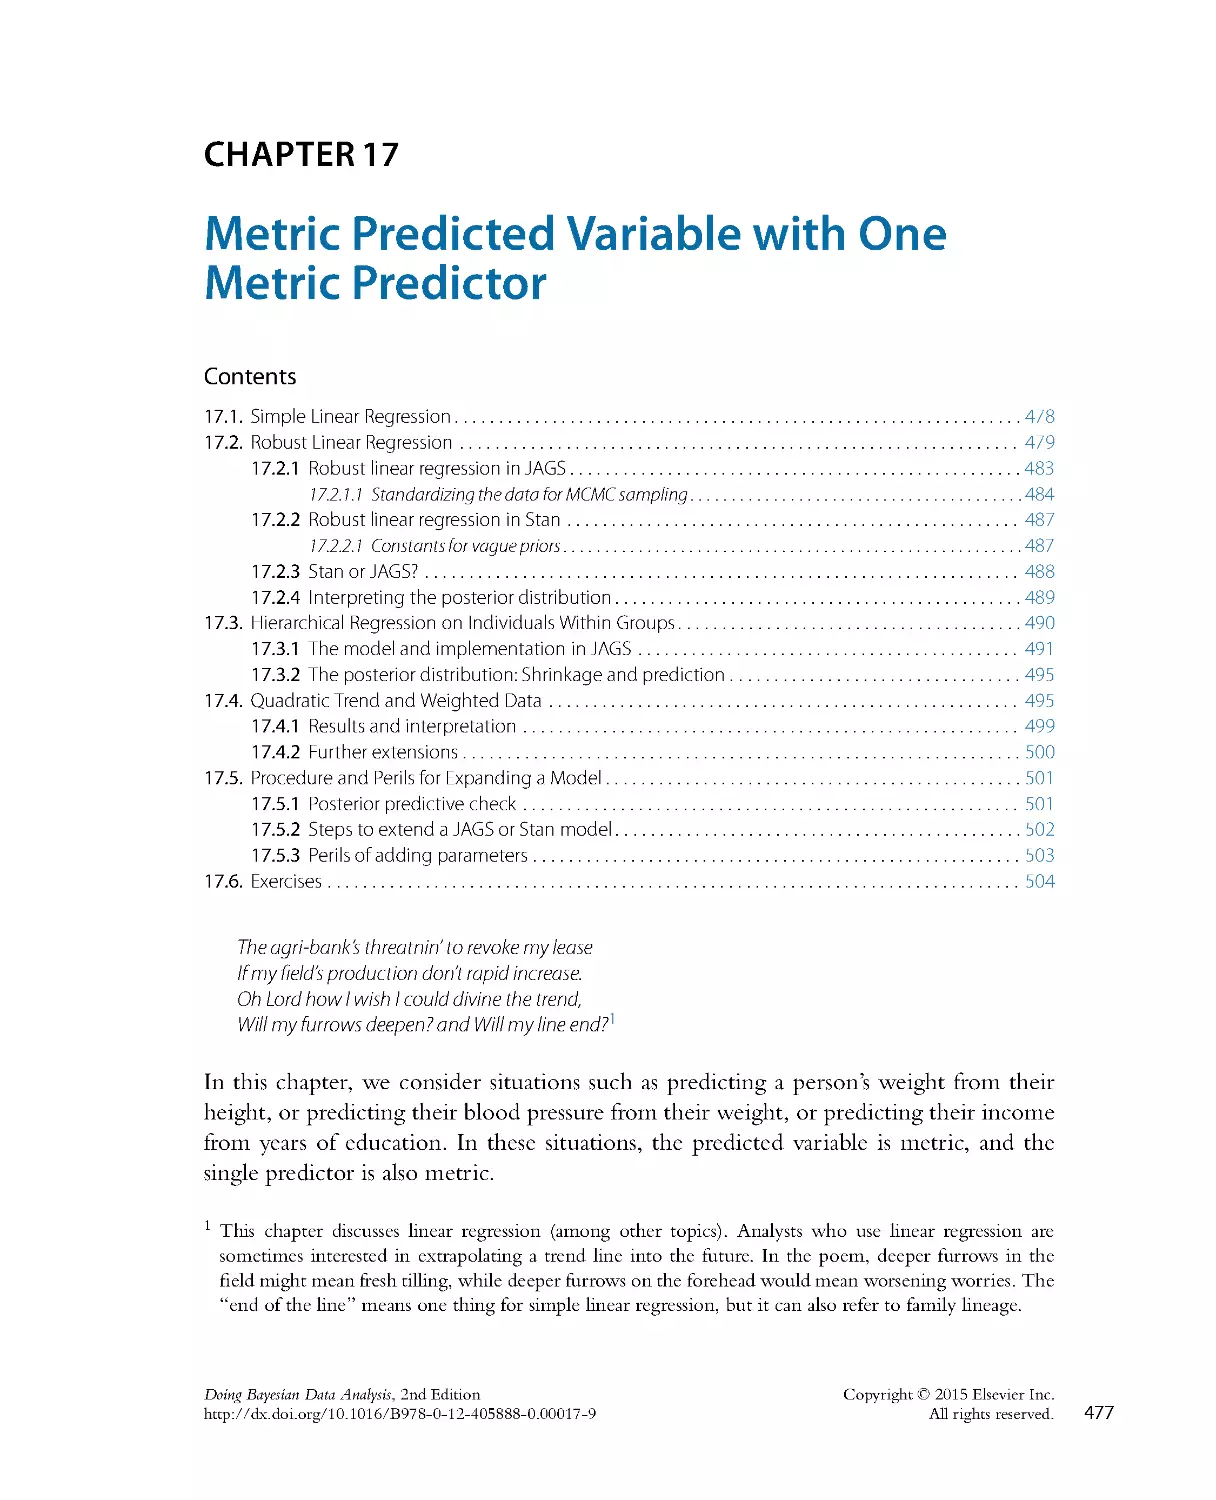 23. Chapter-17-Metric-Predicted-Variable-with-One-Metric-Predictor_2015_Doing-Bayesian-Data-Analysis-Second-Edition-